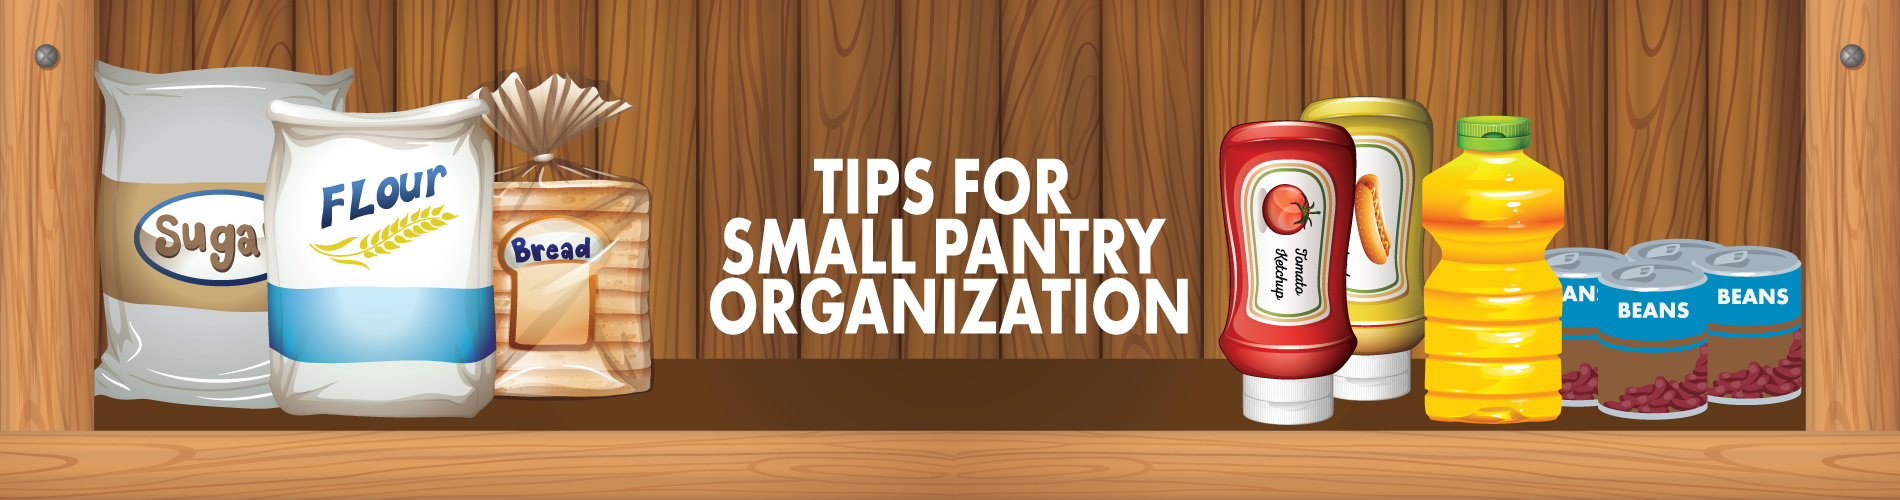 Tips for Small Pantry Organiation